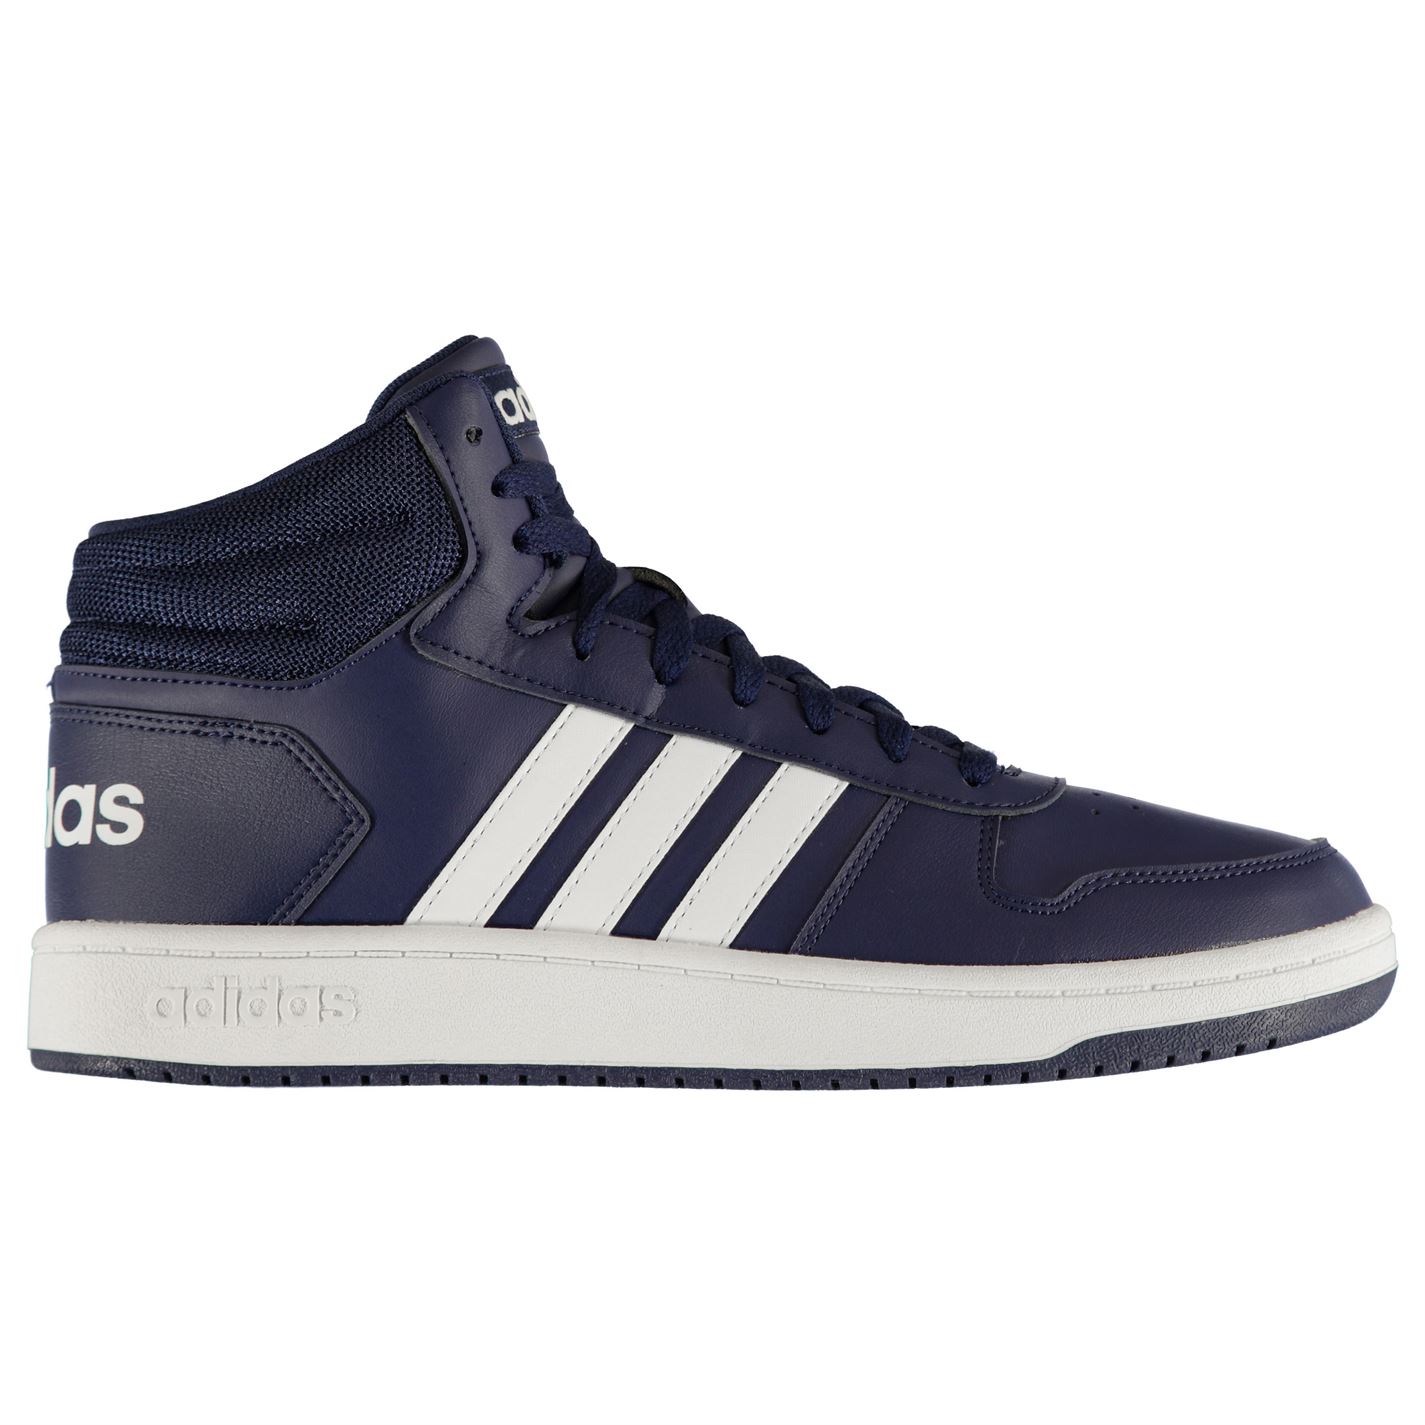 ADIDAS HOOPS MID Shoes Mens Gents High Top Laces Fastened Ventilated ...